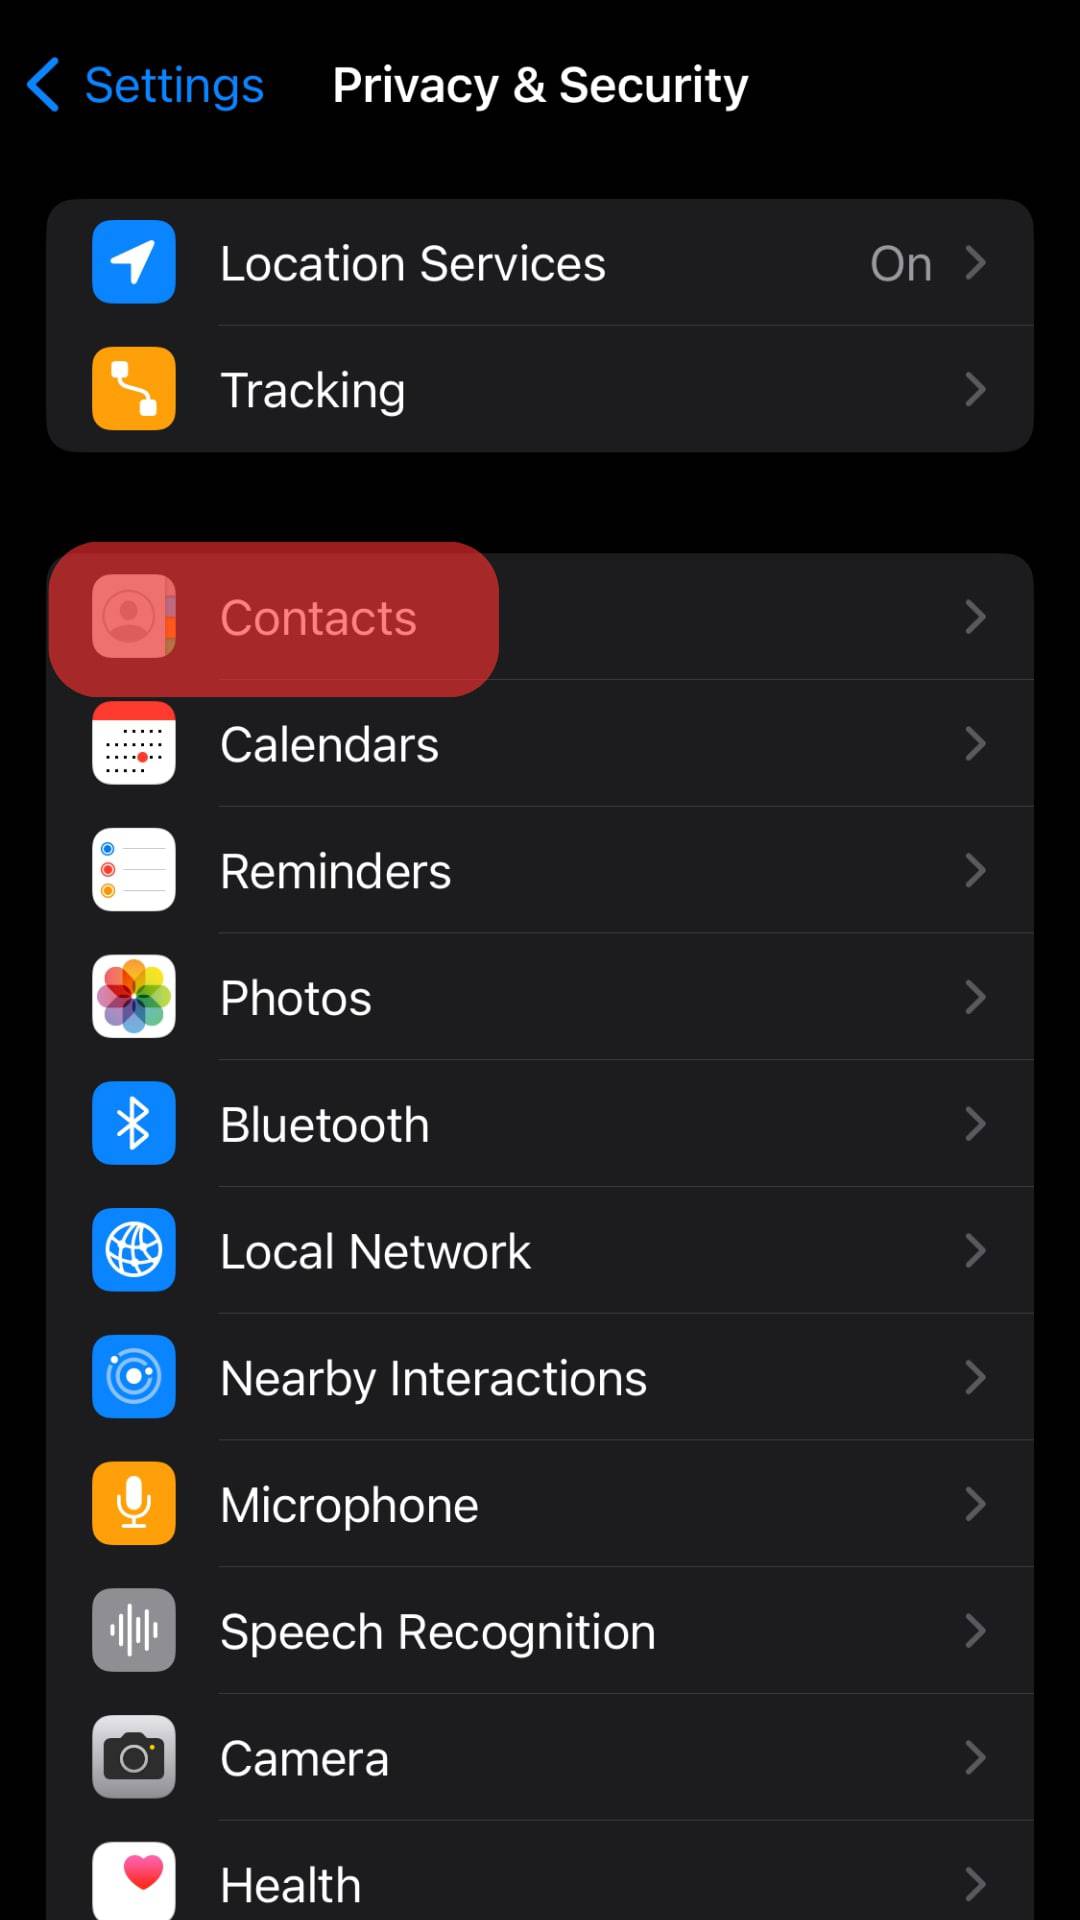 Select Contacts.